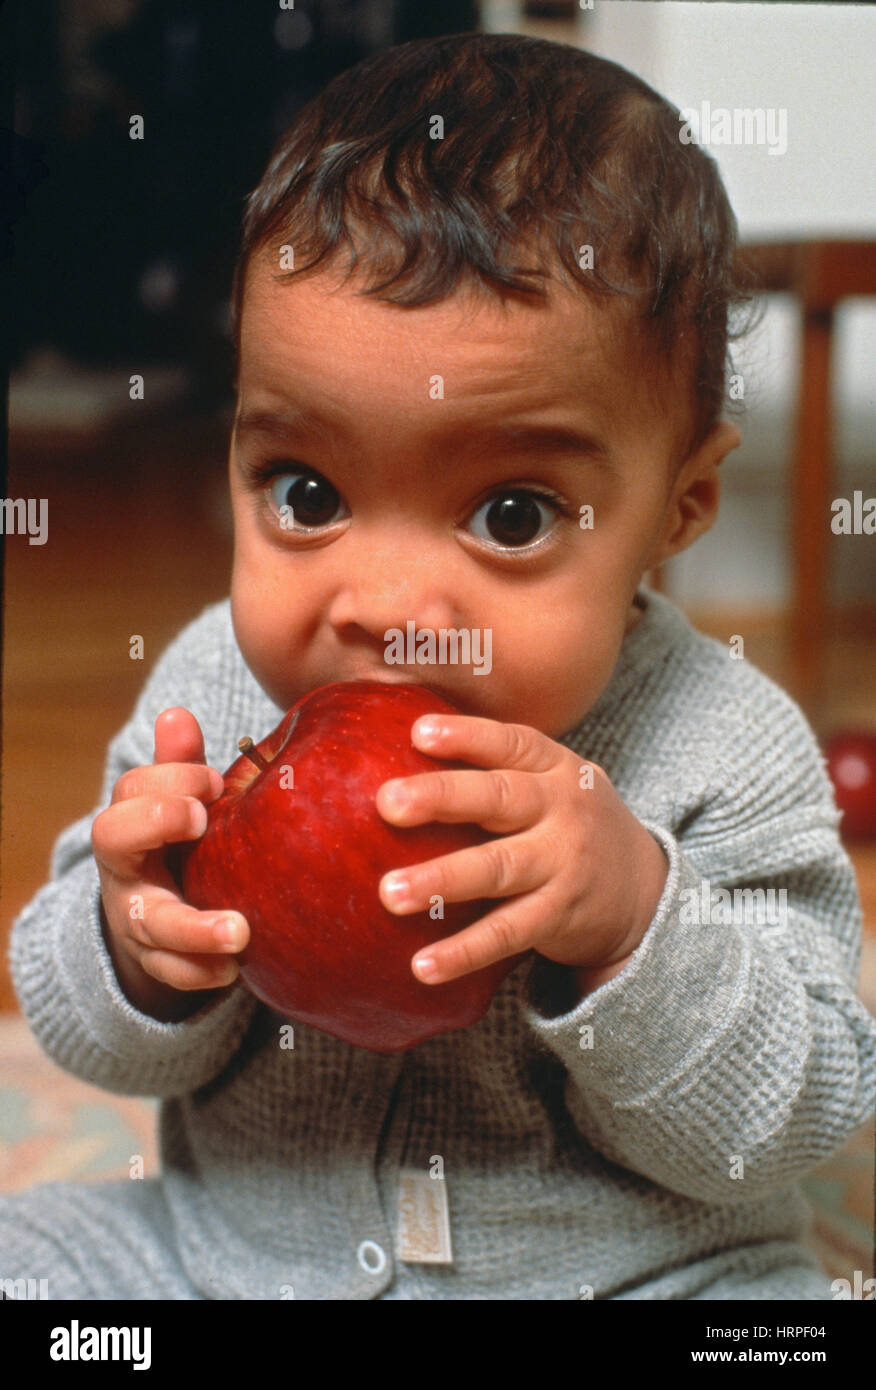 6 month year old boy negotiating a big apple. Stock Photo